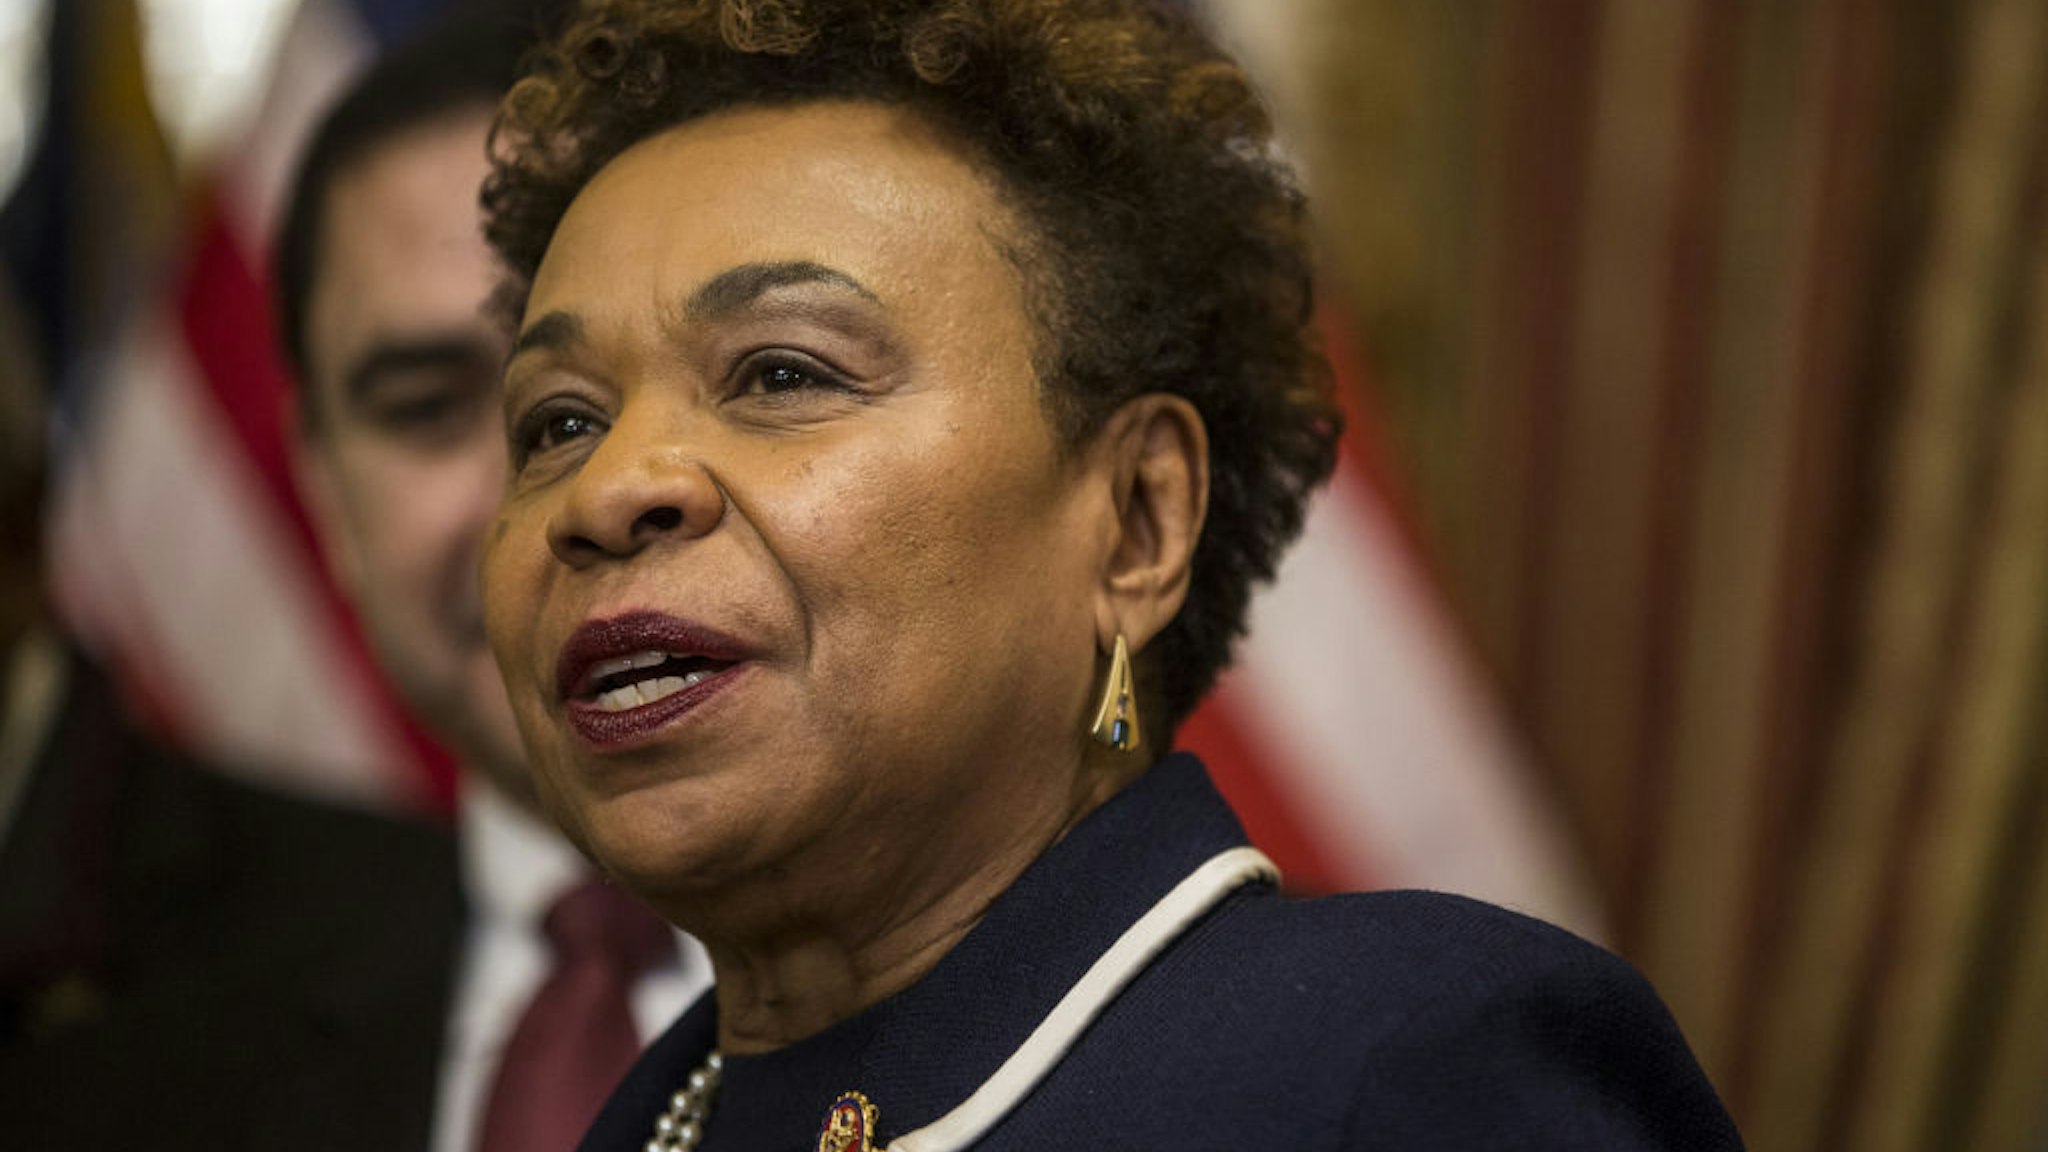 Representative Barbara Lee, a Democrat from California, speaks during an enrollment ceremony on Capitol Hill in Washington, D.C., U.S., on Feb. 14, 2019. Congress sent President Donald Trump legislation he said he'll sign to avoid another government shutdown, as a new dispute looms over his decision to declare a national emergency to get a total of $8 billion in federal money for his border wall, according to an official.